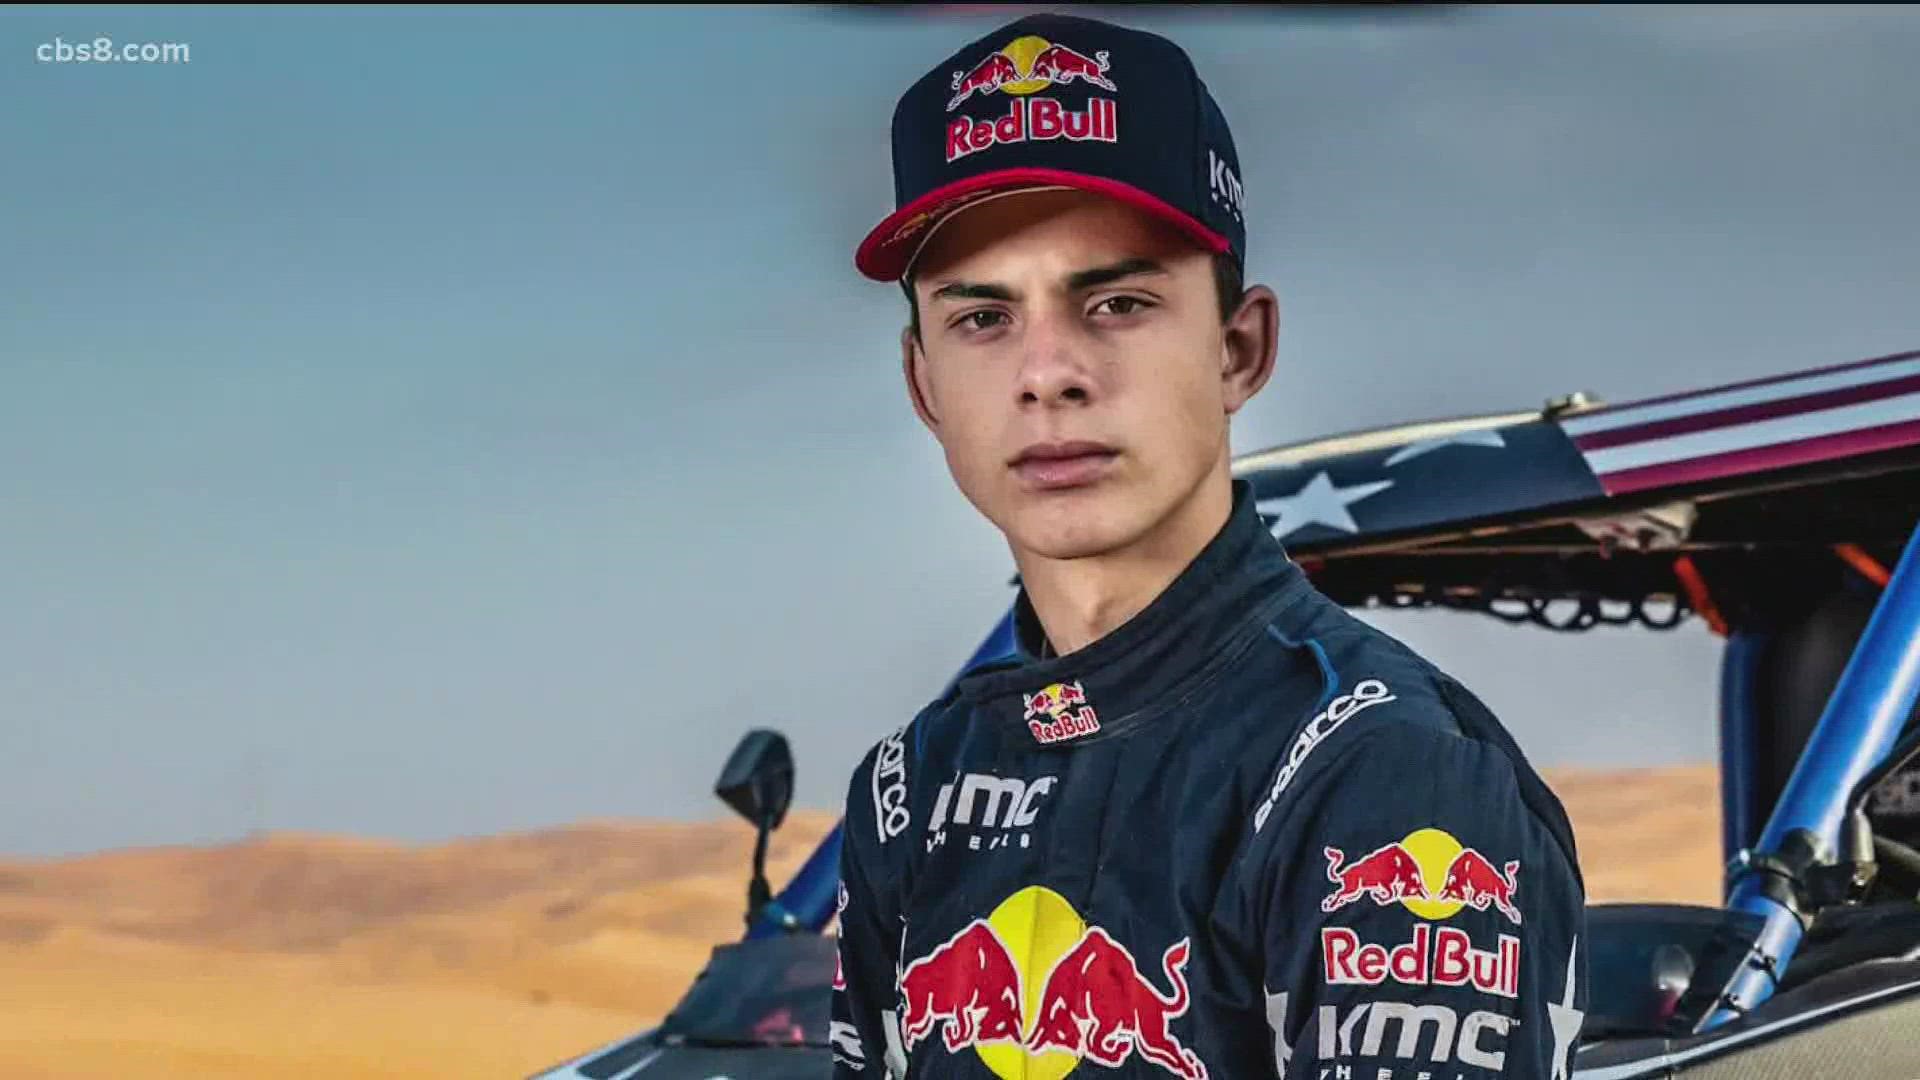 Last year as an 18-year-old rookie, he became the youngest driver to ever win a stage at Dakar.